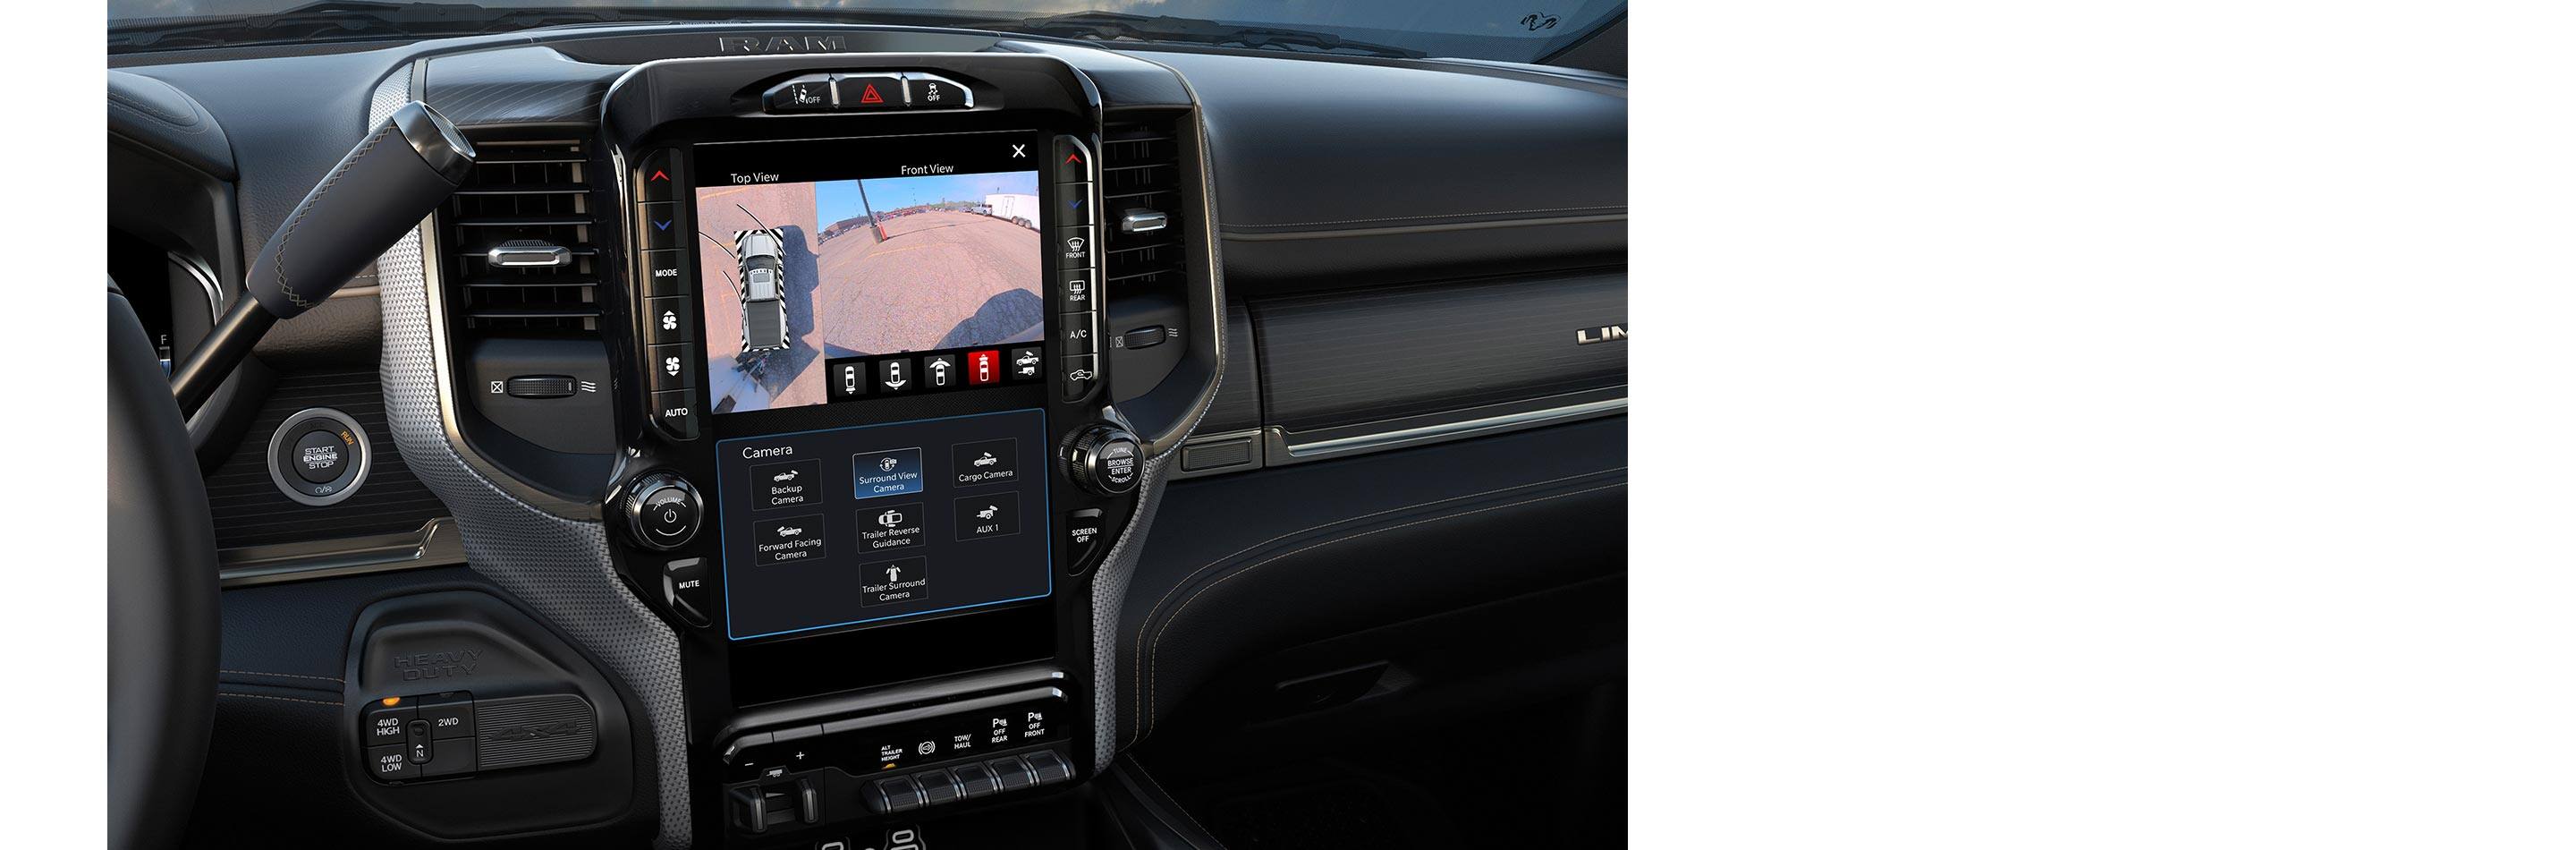 The Uconnect touchscreen in the 2023 Ram 2500 displaying the output of the 360-degree Surround View Camera.